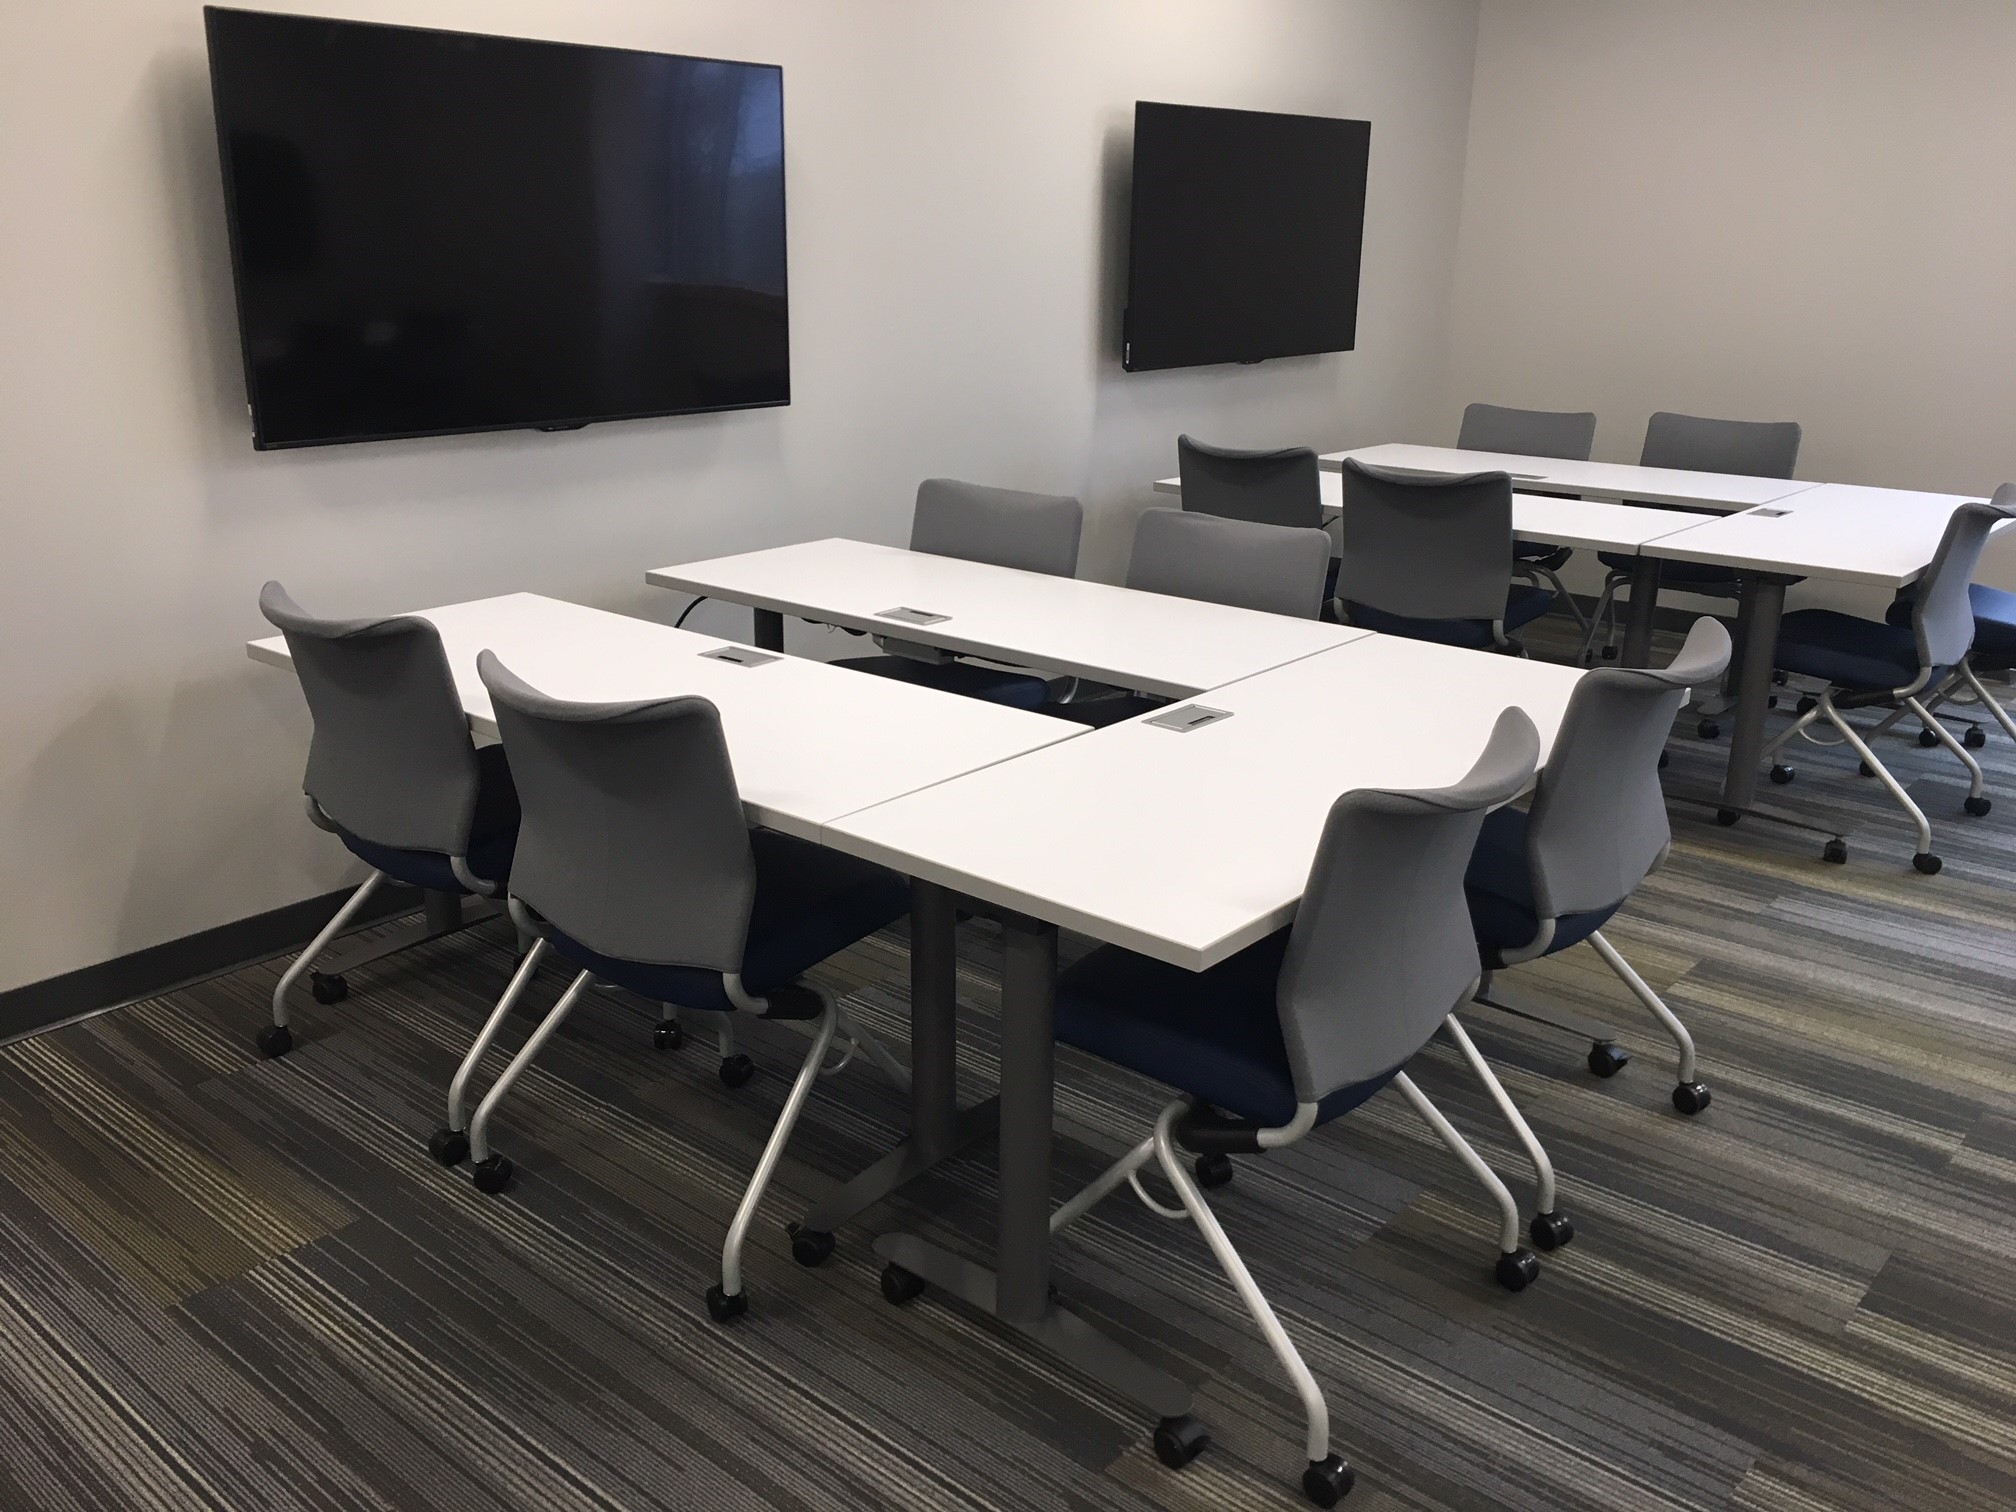 Classroom with conference table